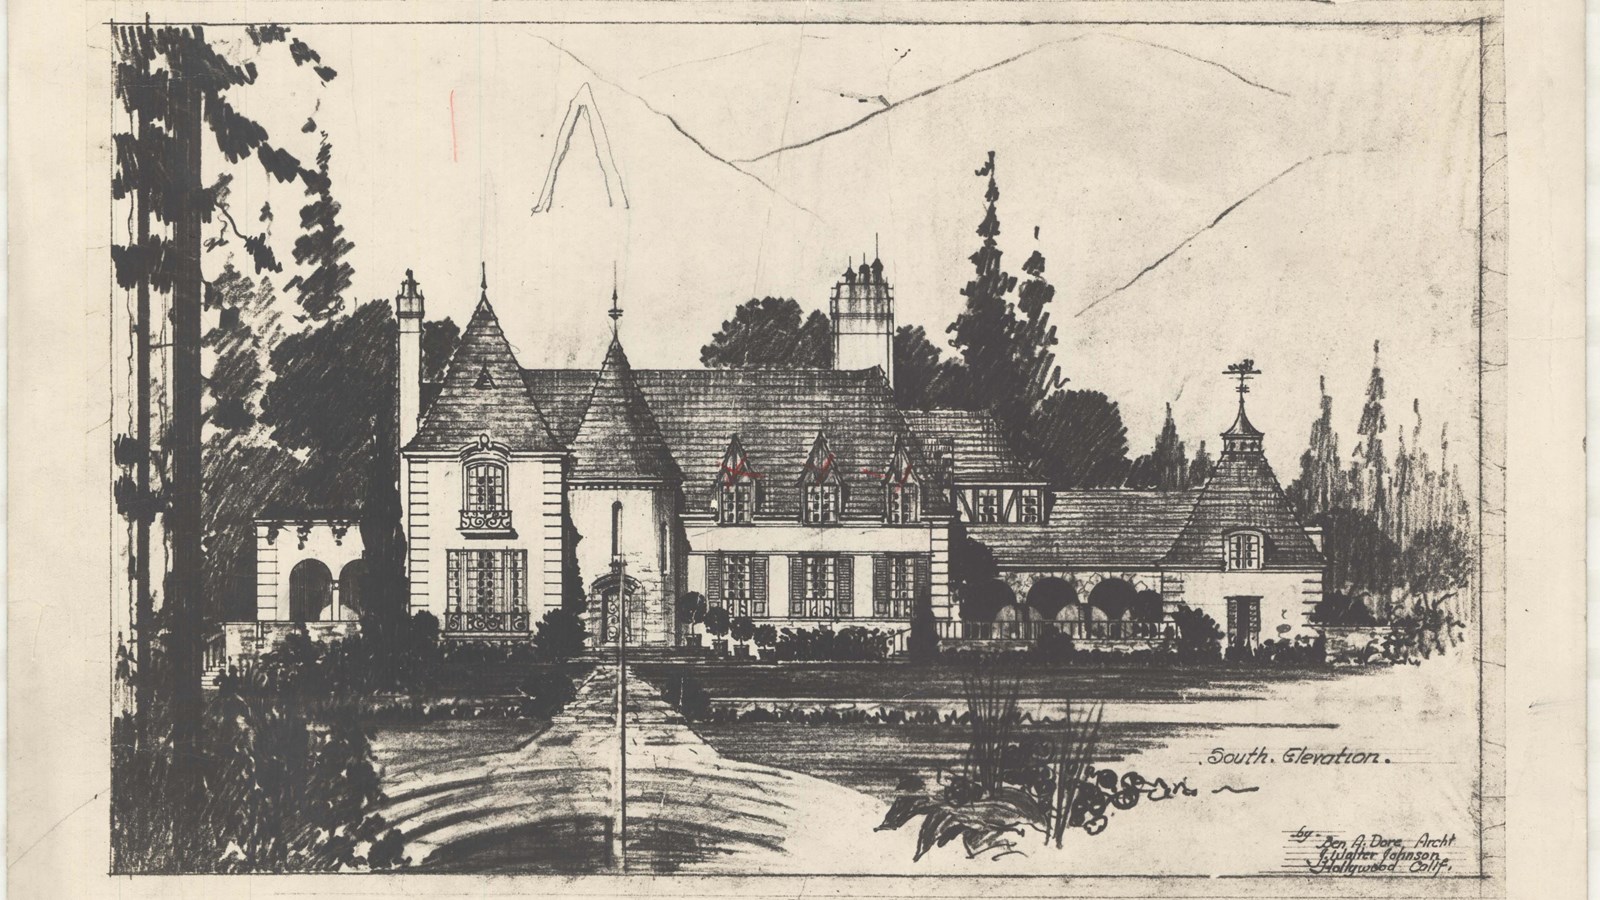 Pencil drawing of large home with flat grassy area in front with some trees